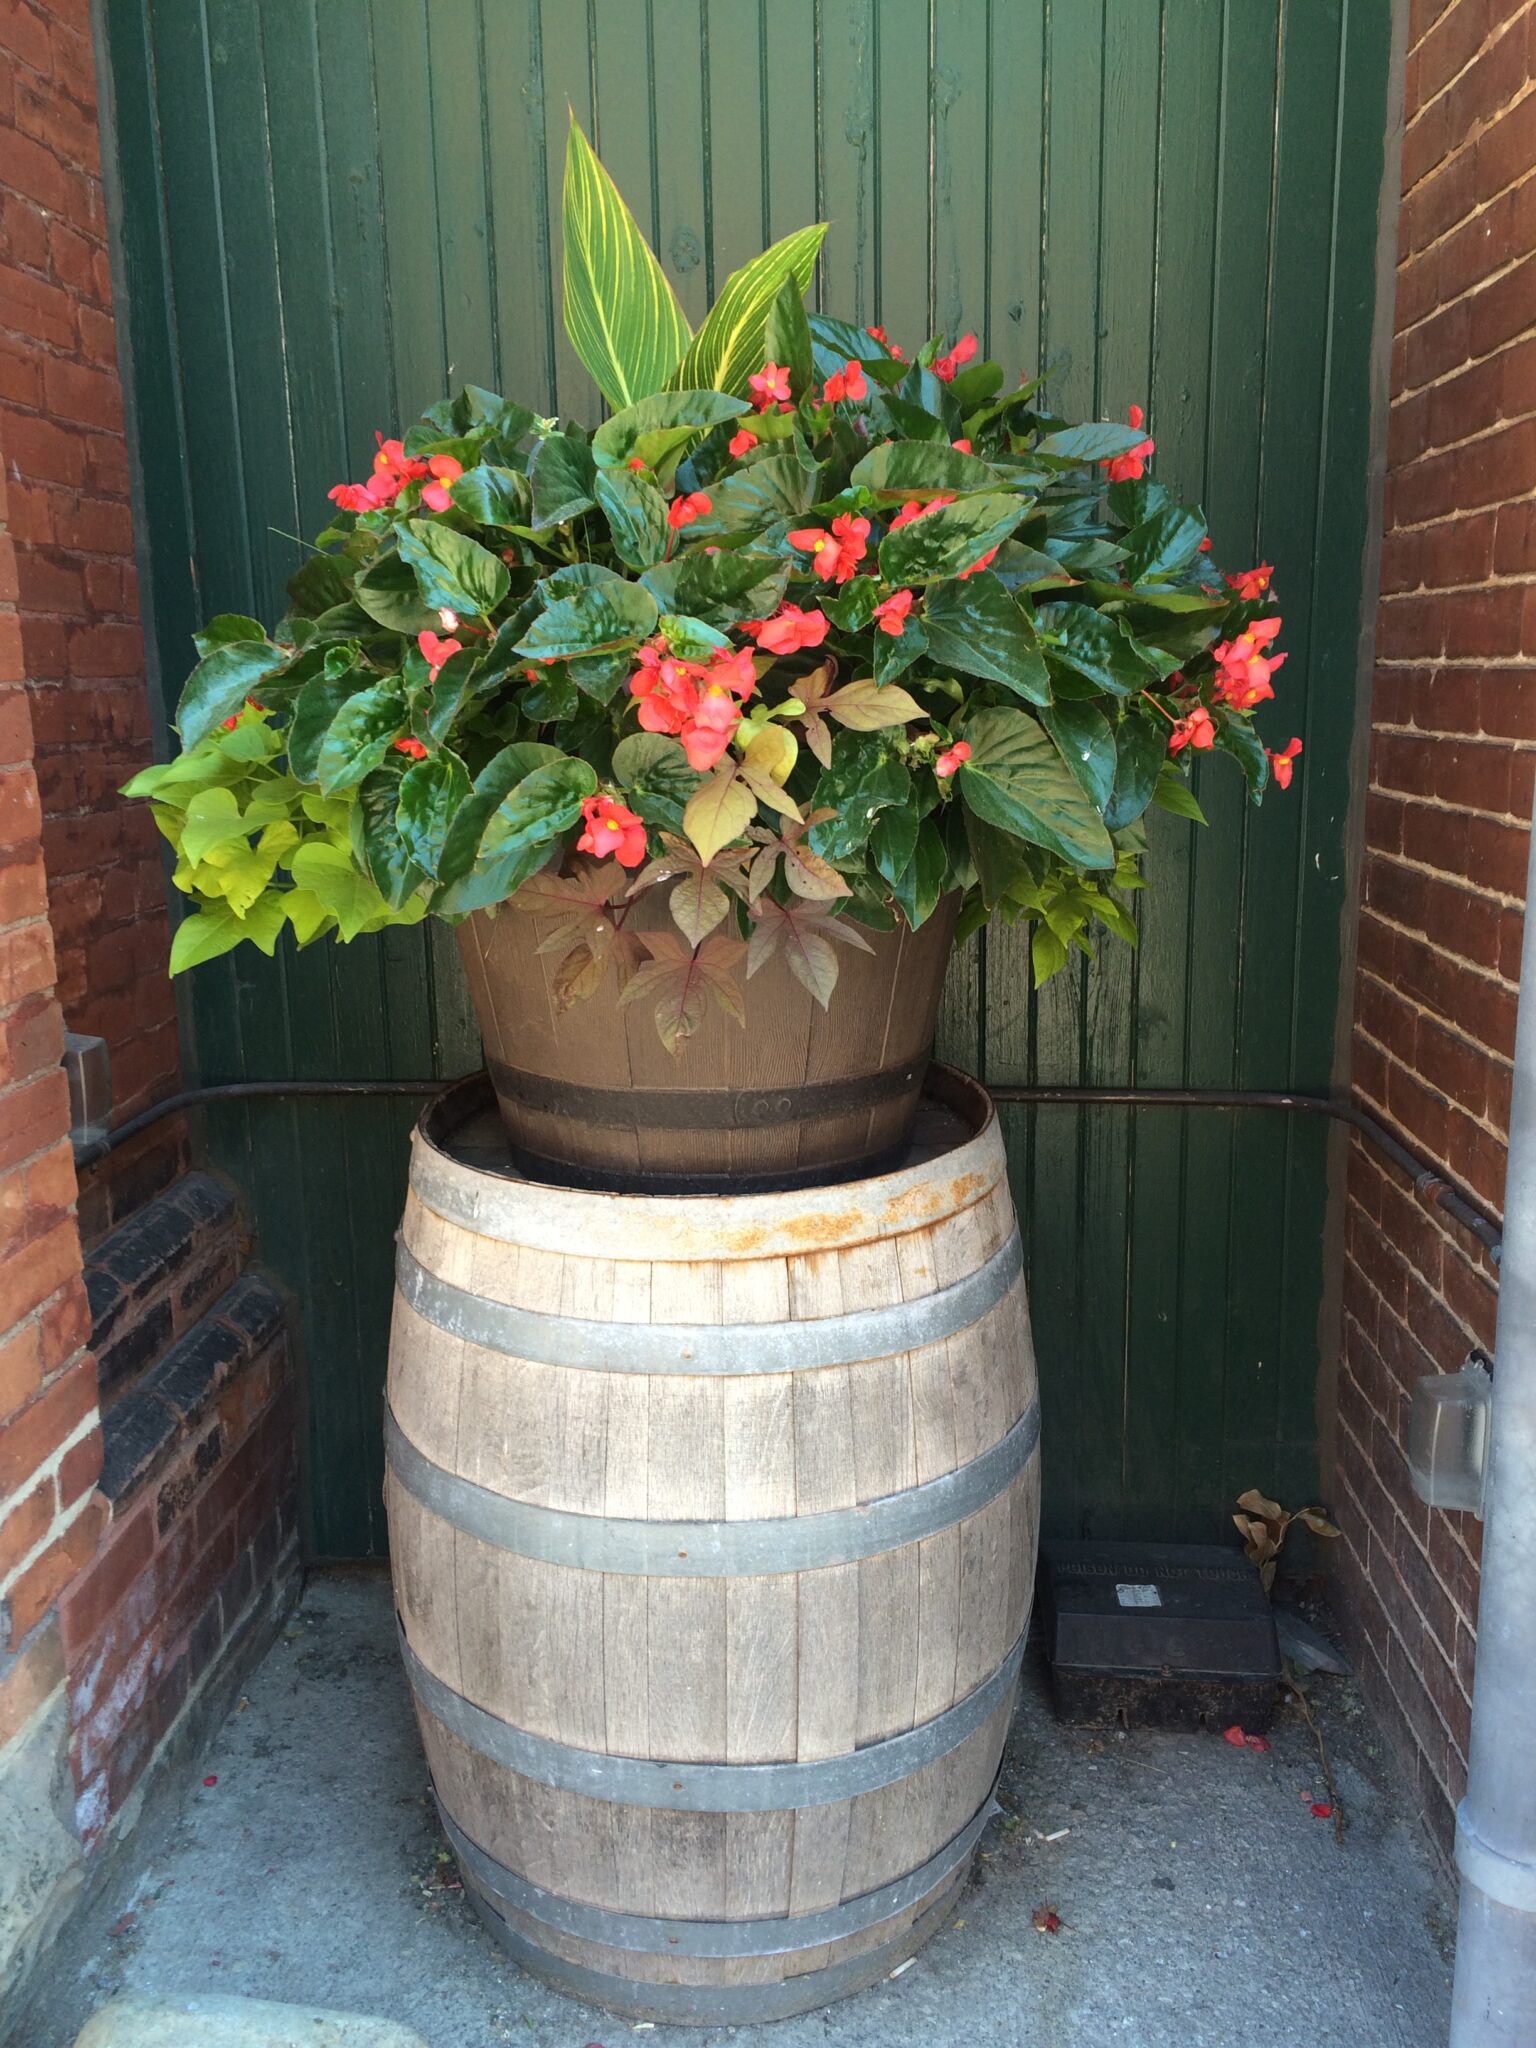 A planter on top of a barrel.  Green foilage and dark orange plants look pretty in a cove with red brick sides and a dark green wall in the background